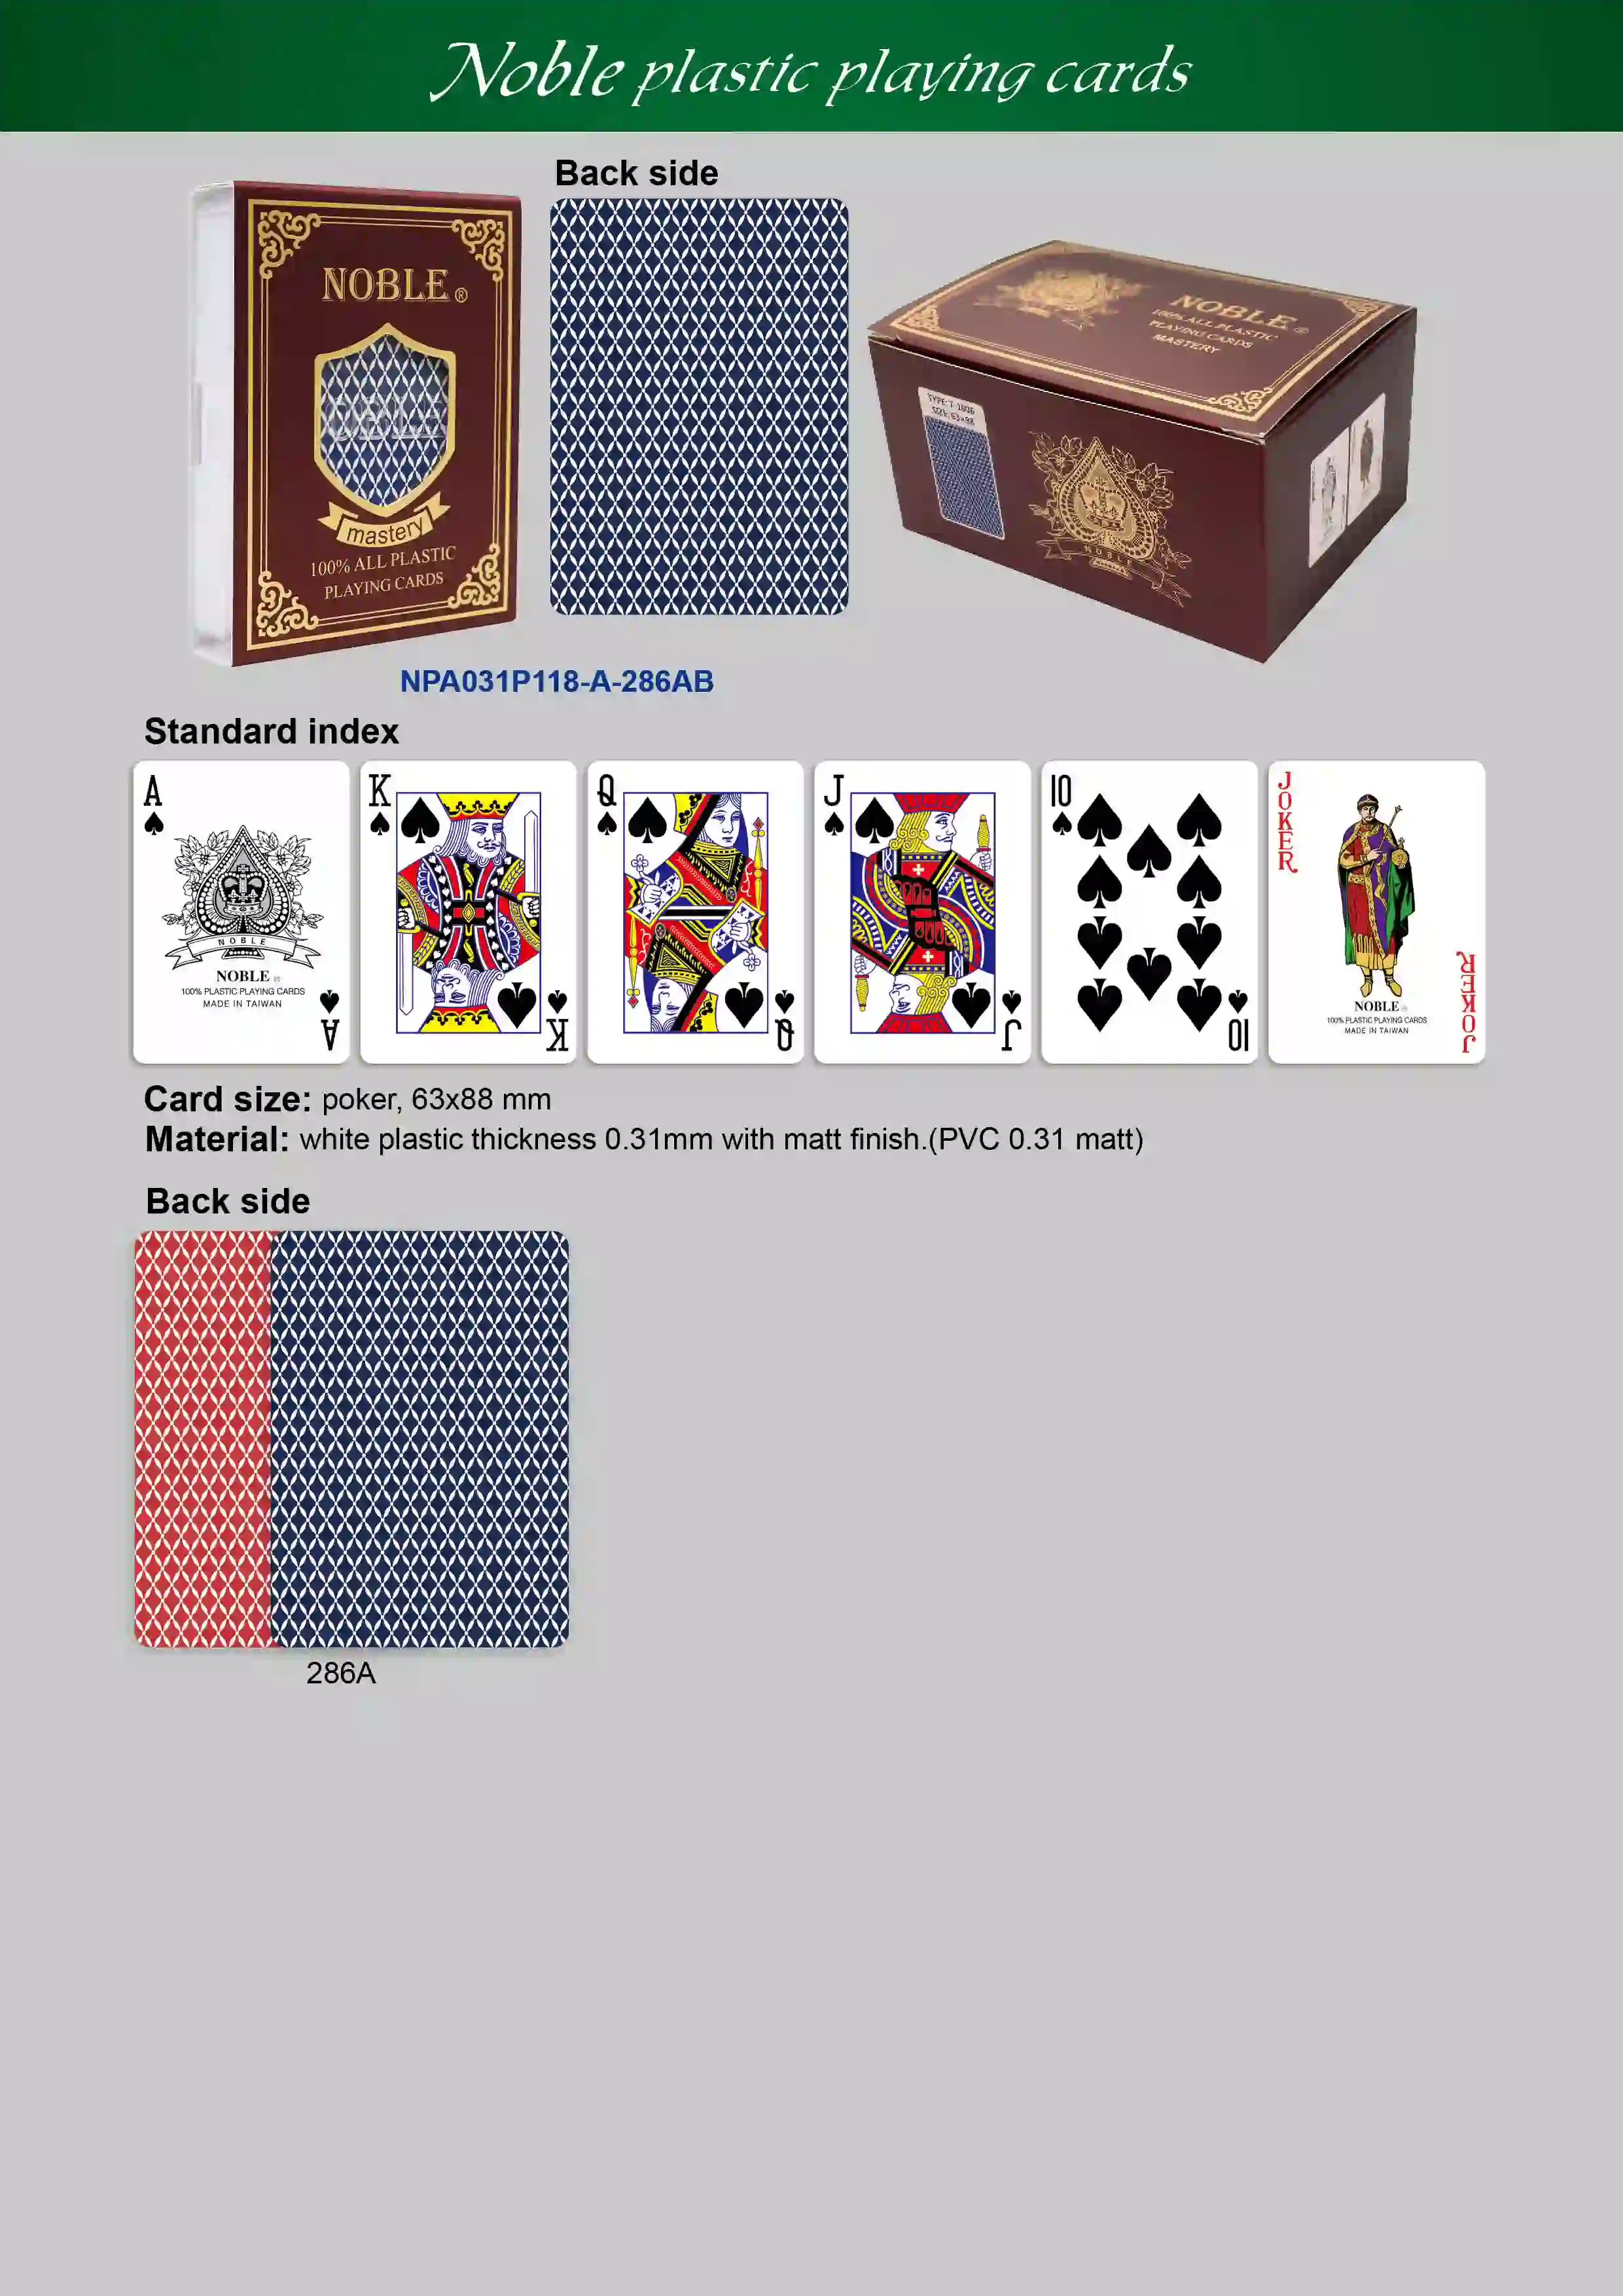 NOBLE Plastic Playing Cards - Standard Index